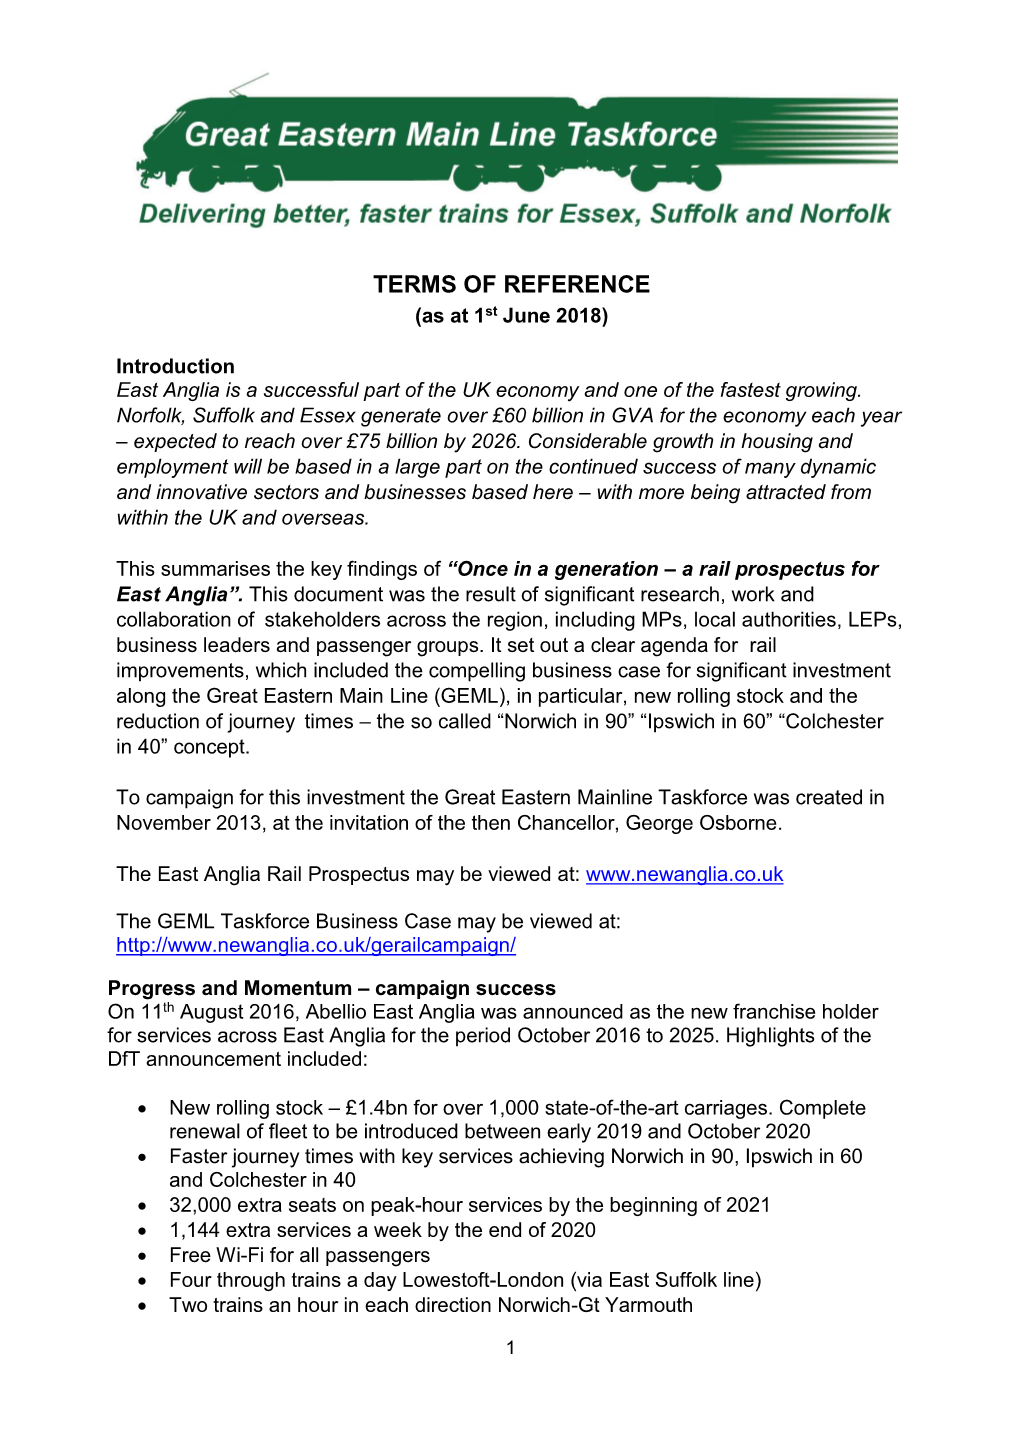 TERMS of REFERENCE (As at 1St June 2018)